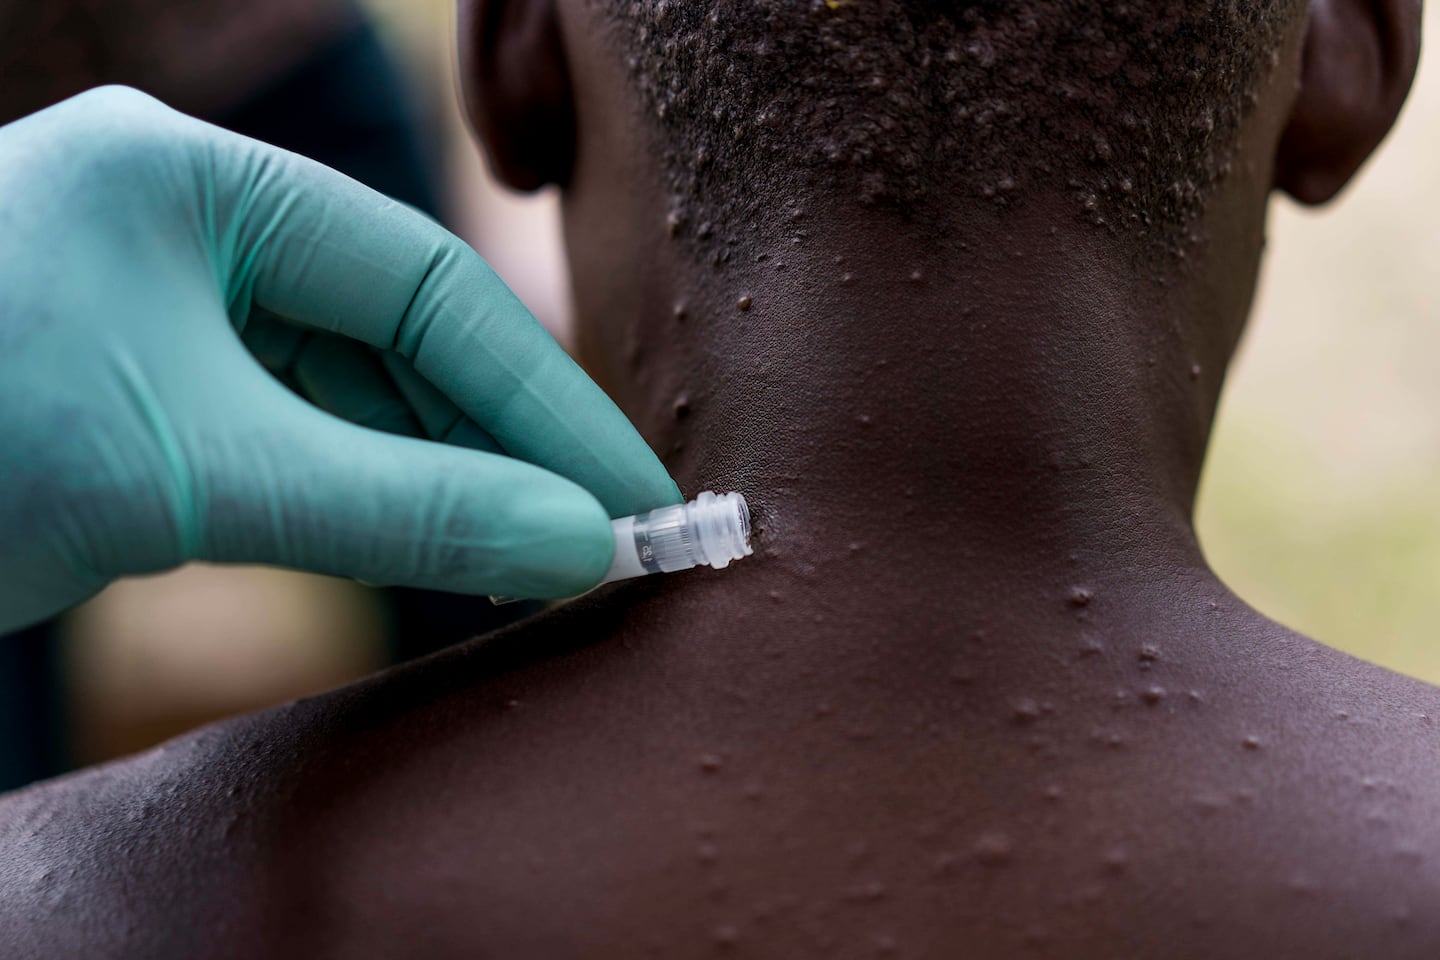 Monkeypox virus reported in a person who flew from Nigeria to Dallas